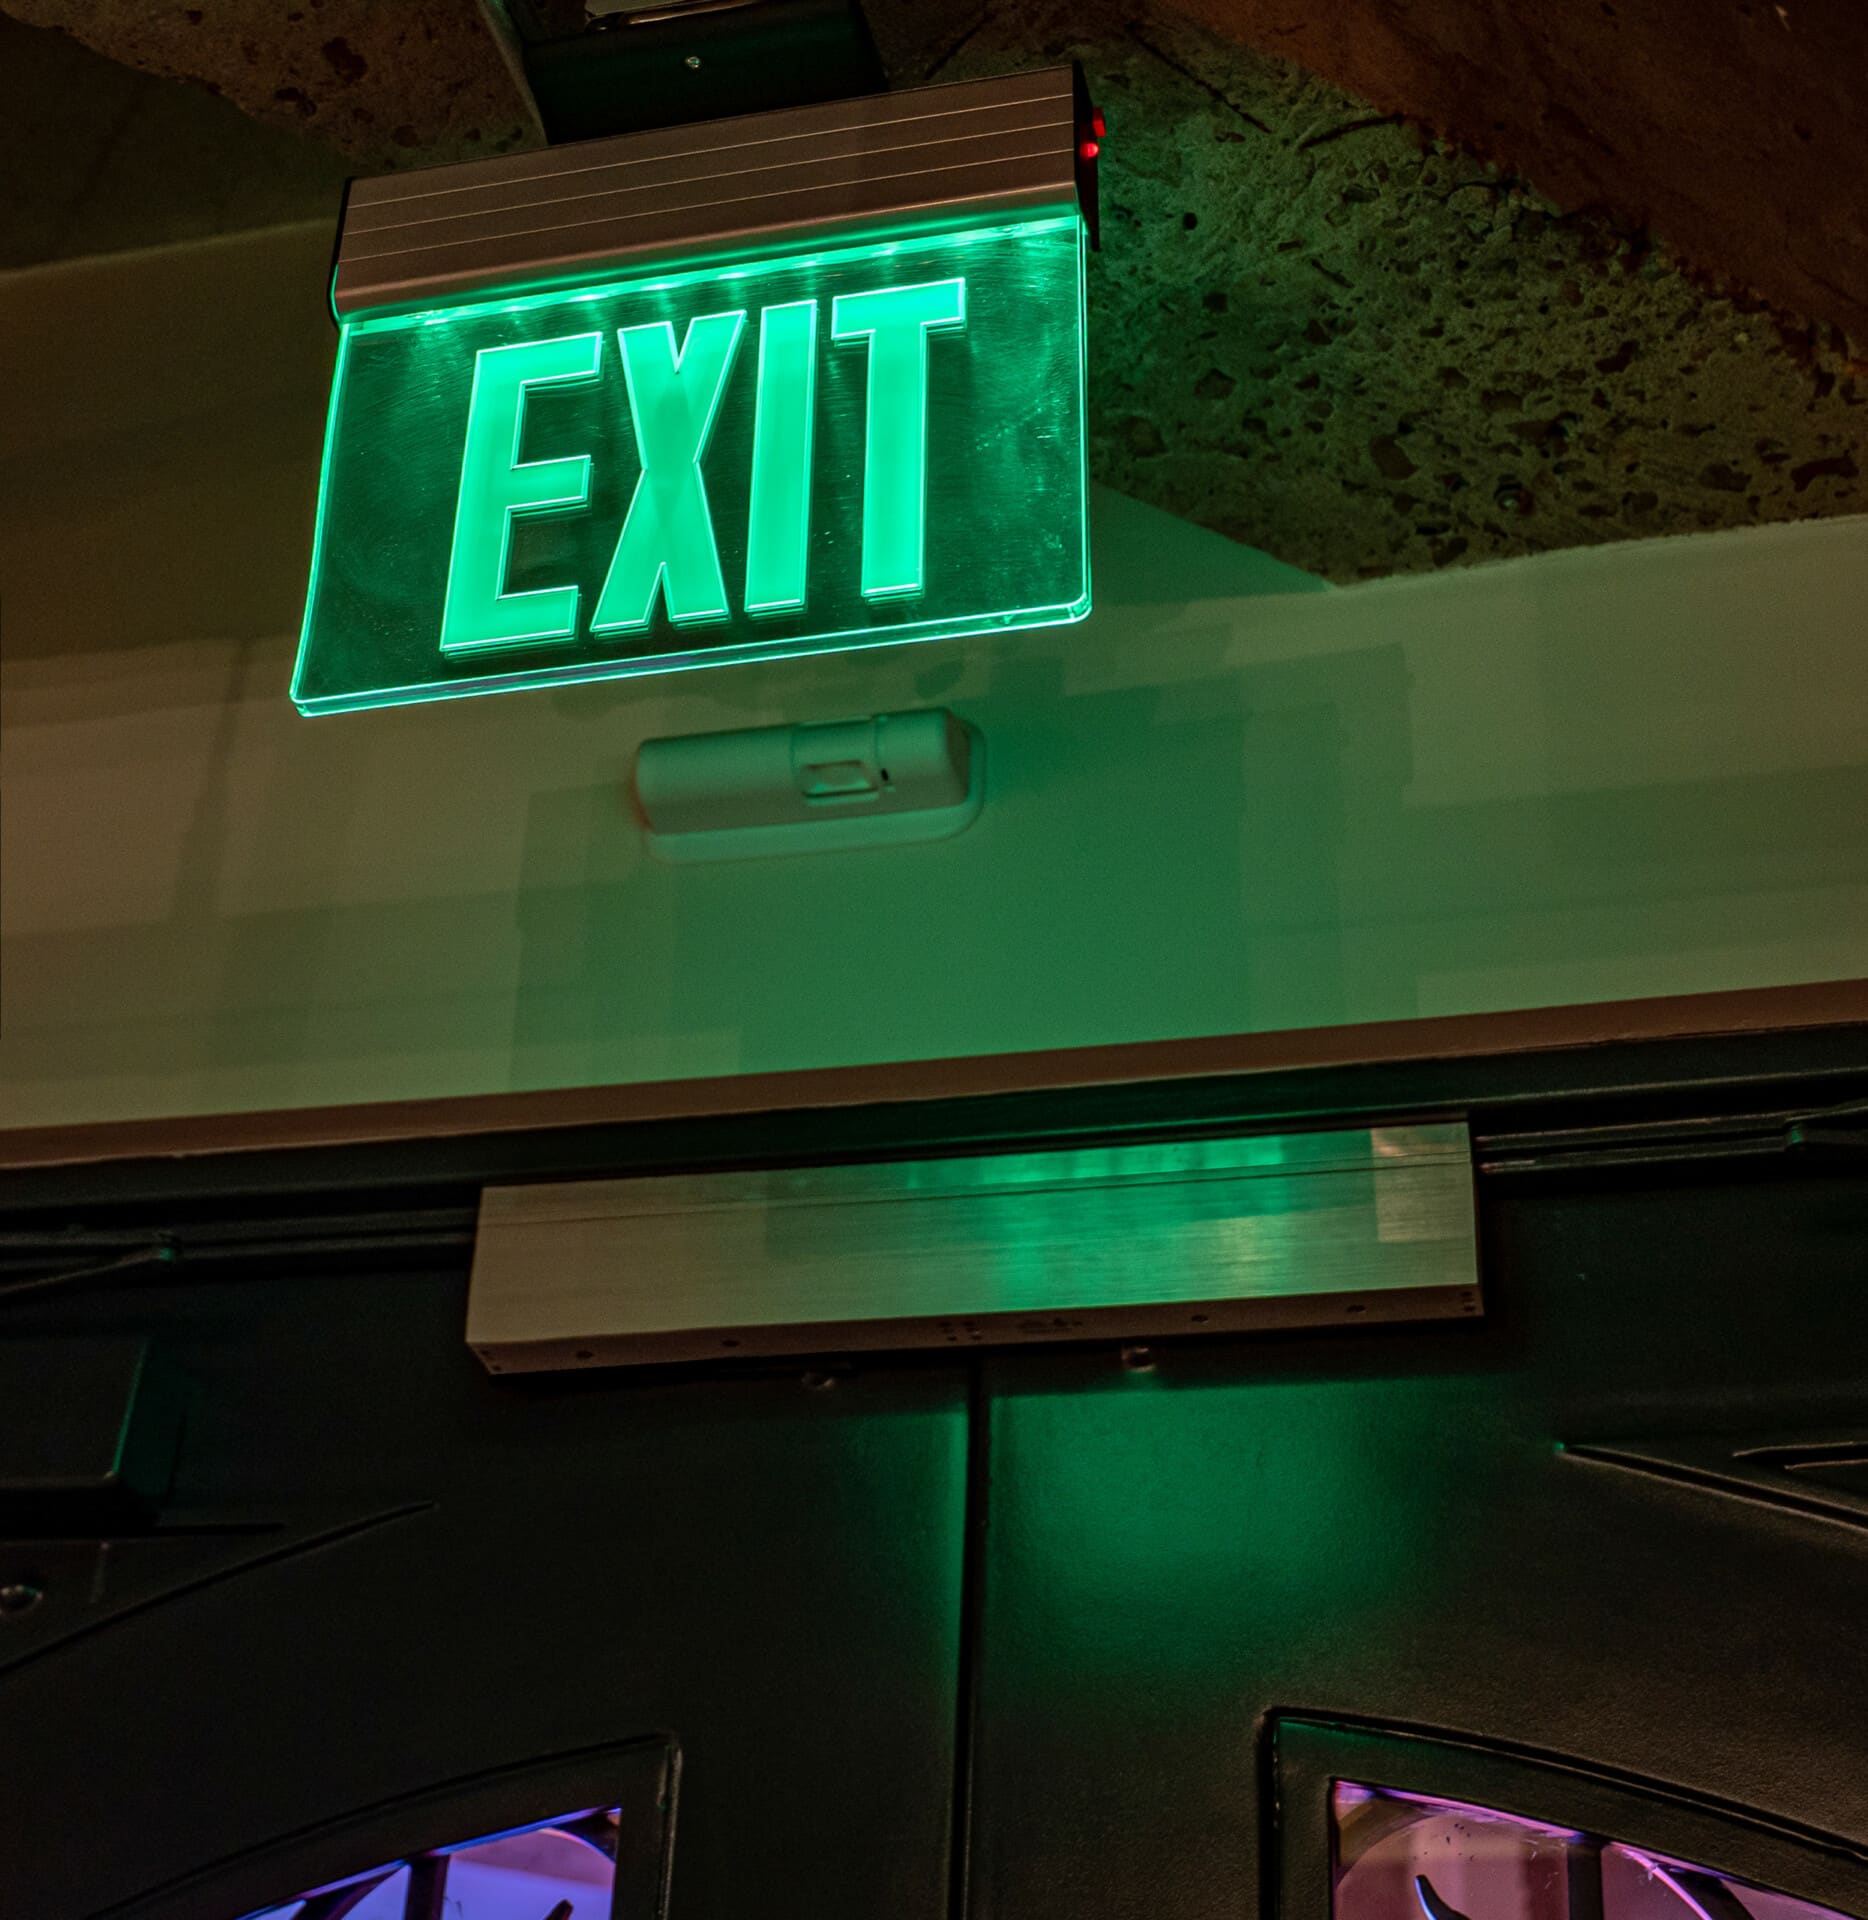 Interior exit sign with green lighting.